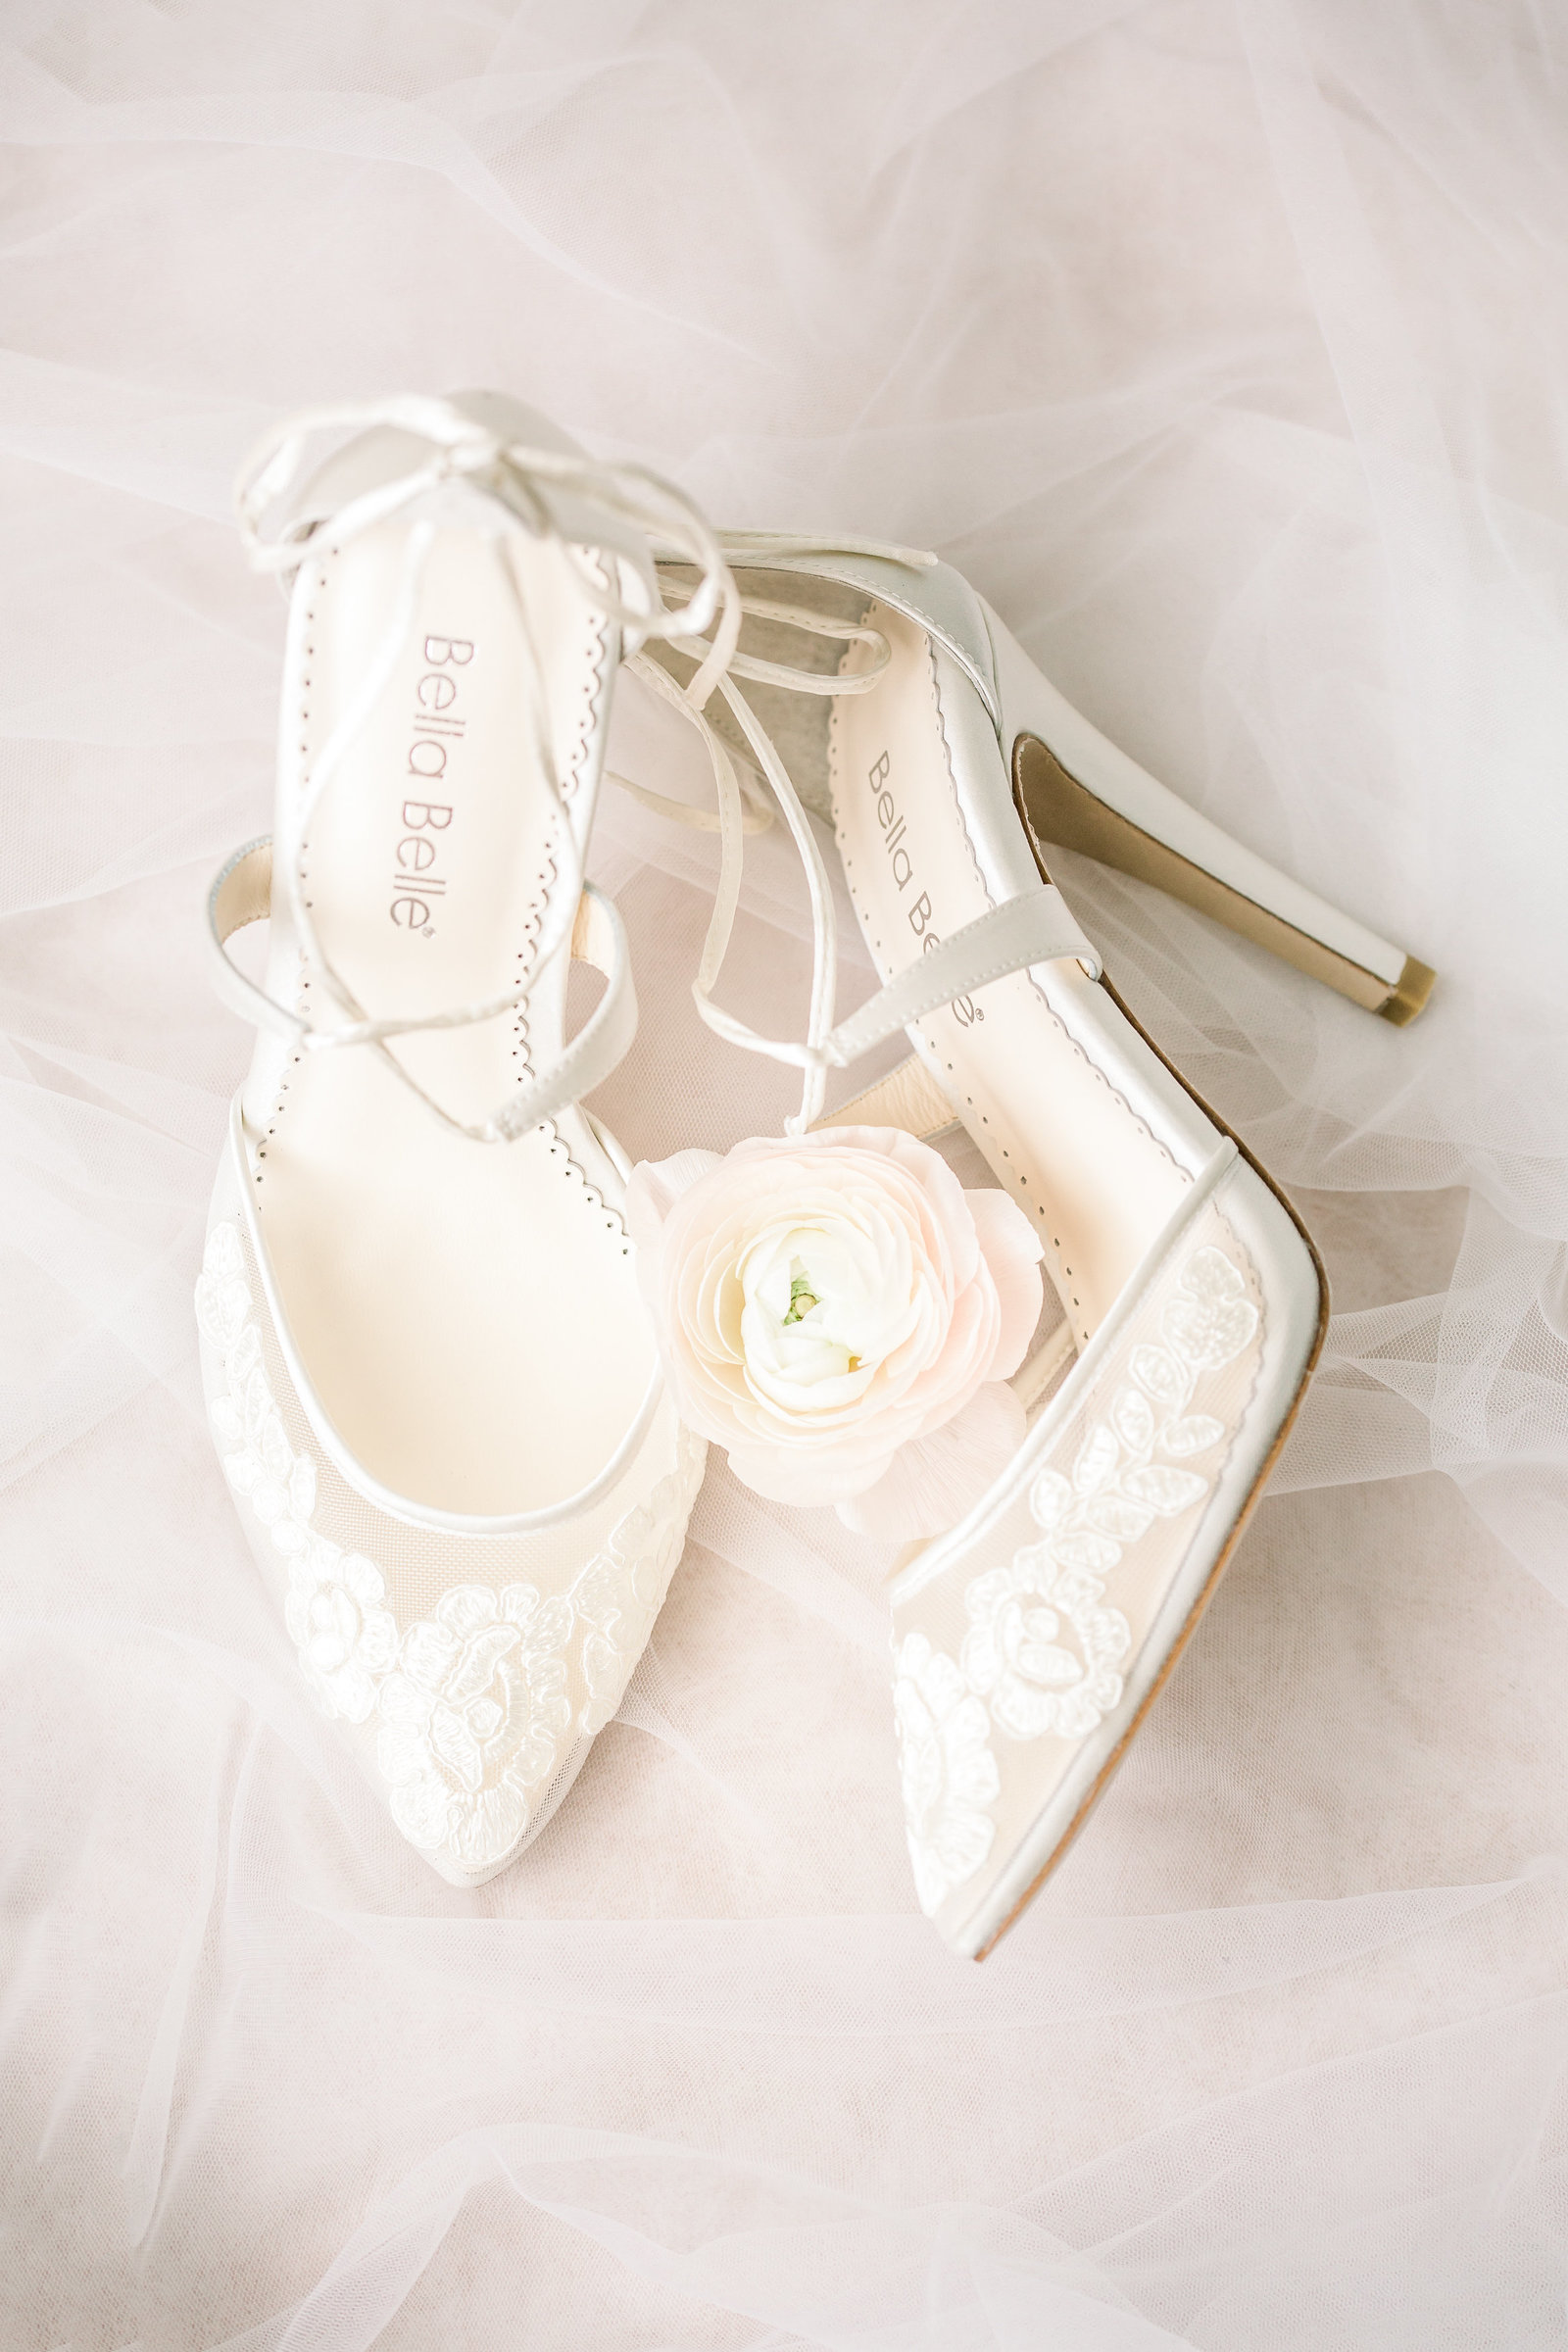 Close up shoes and flowers the Battery wedding by Karen Schanley.